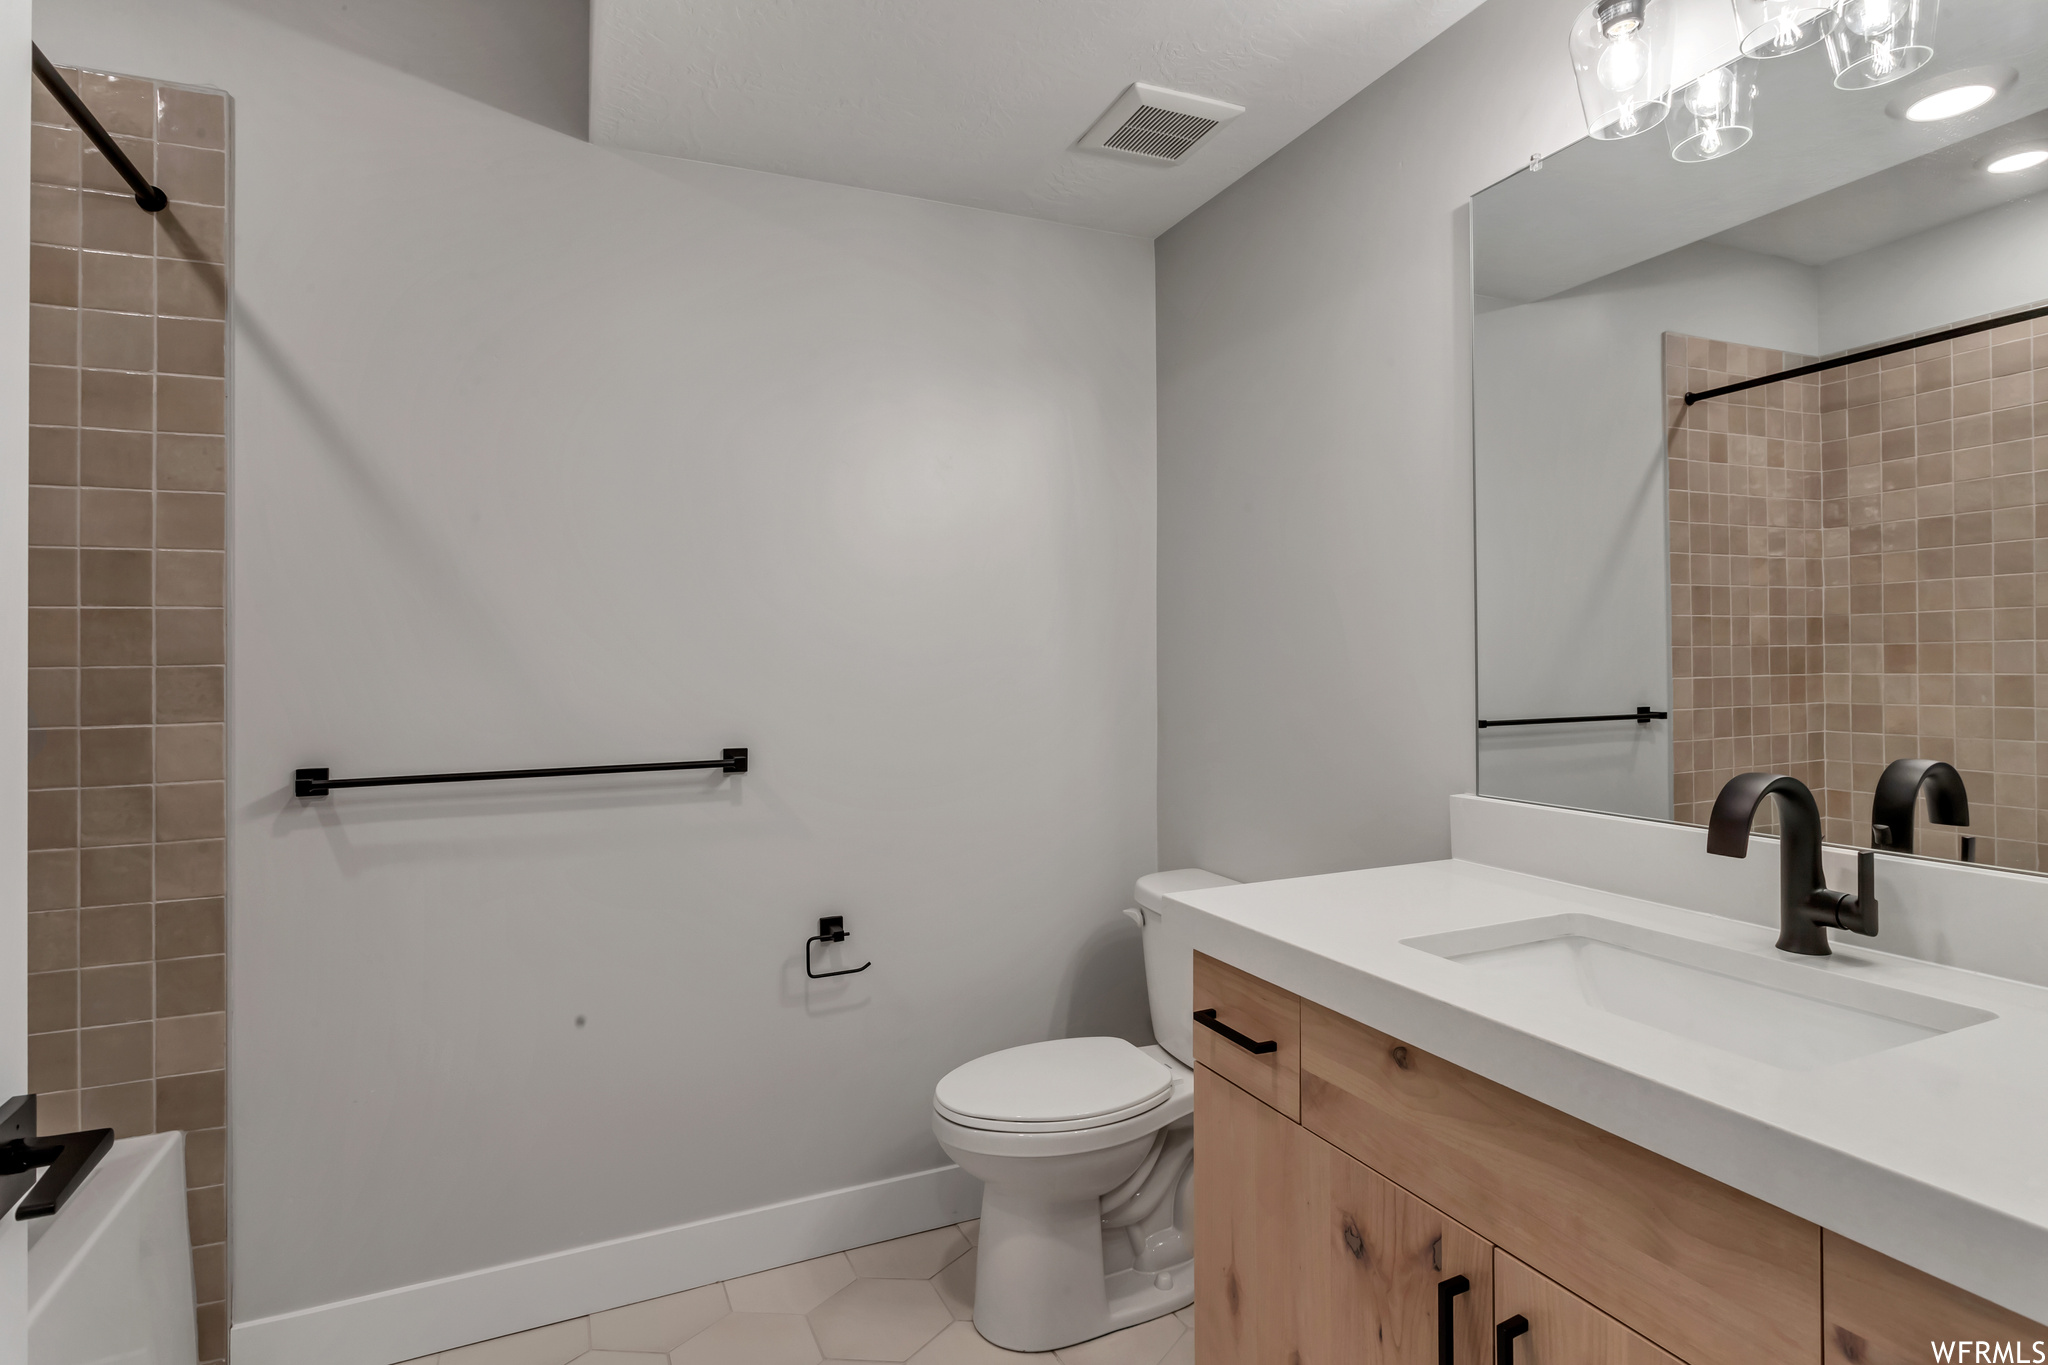 Basement level baths feature under counter sinks for easy care